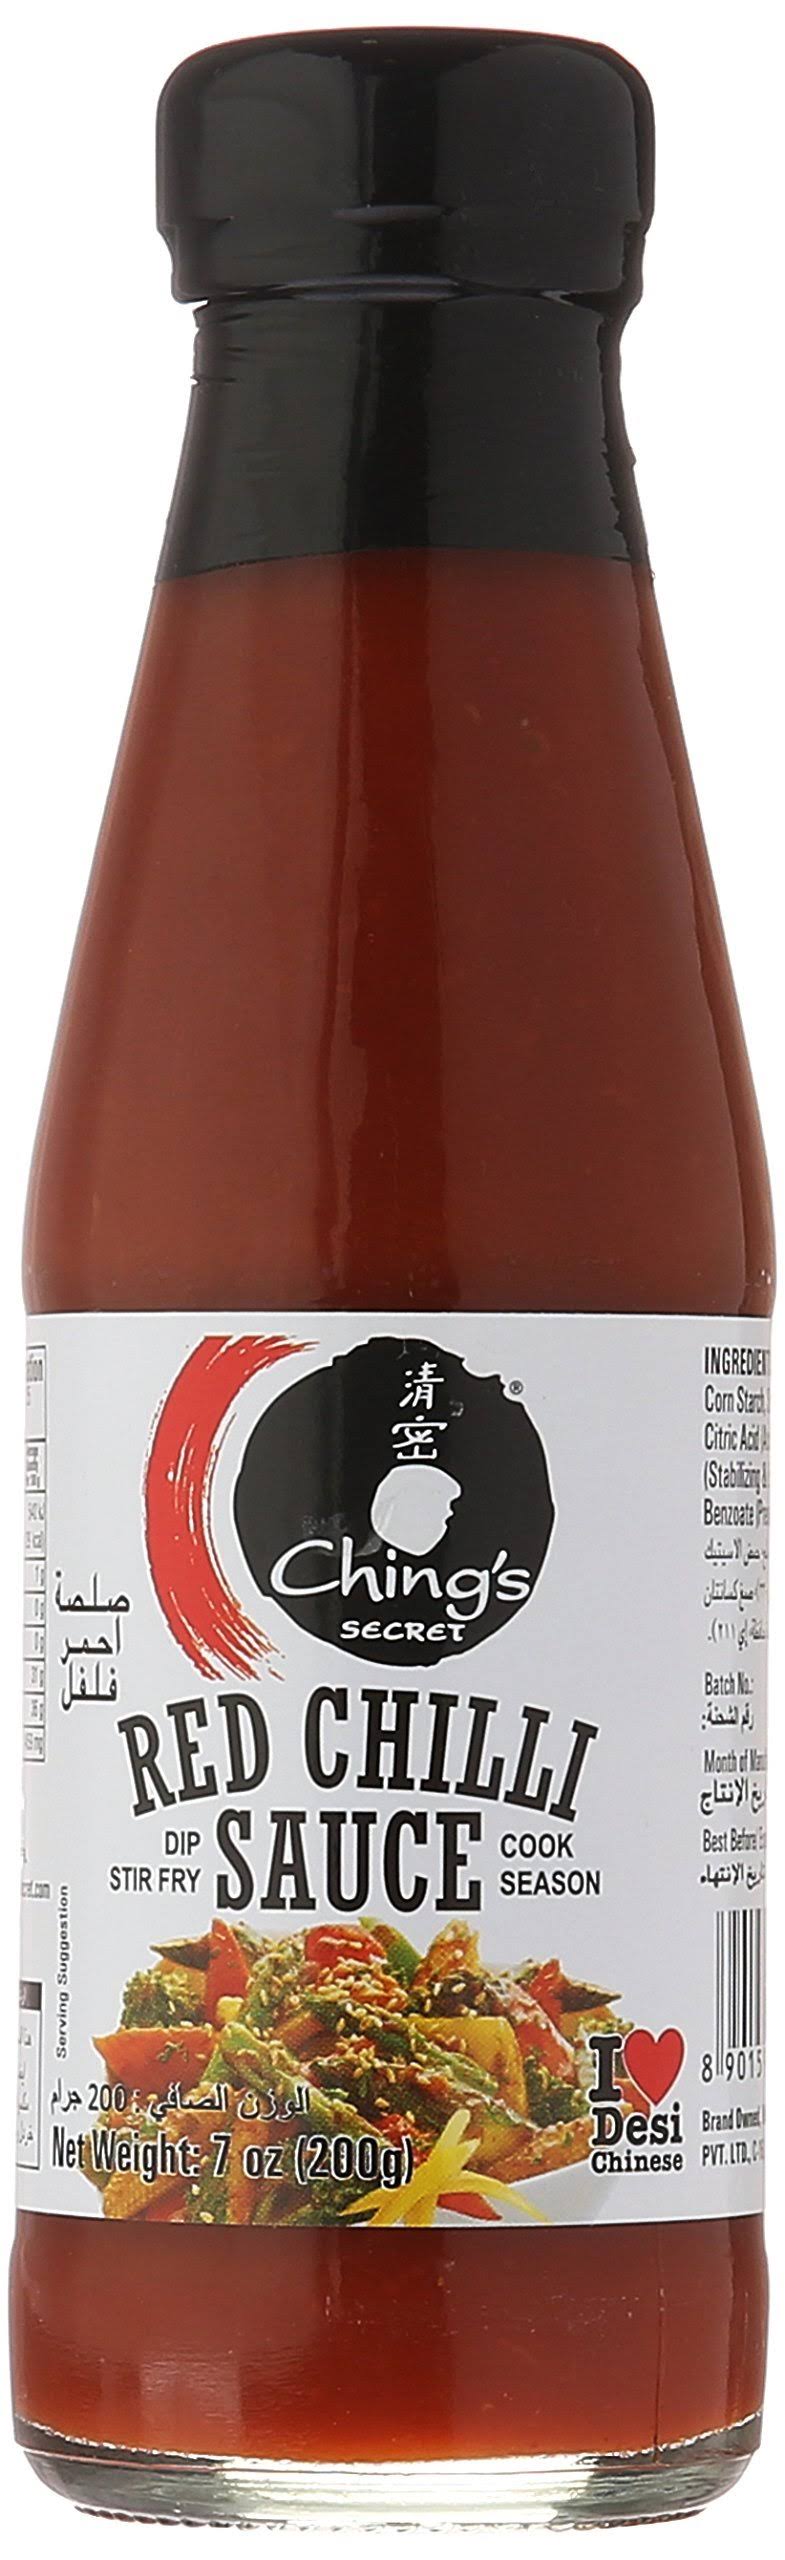 Ching's Secret Red Chilli Sauce - 200g